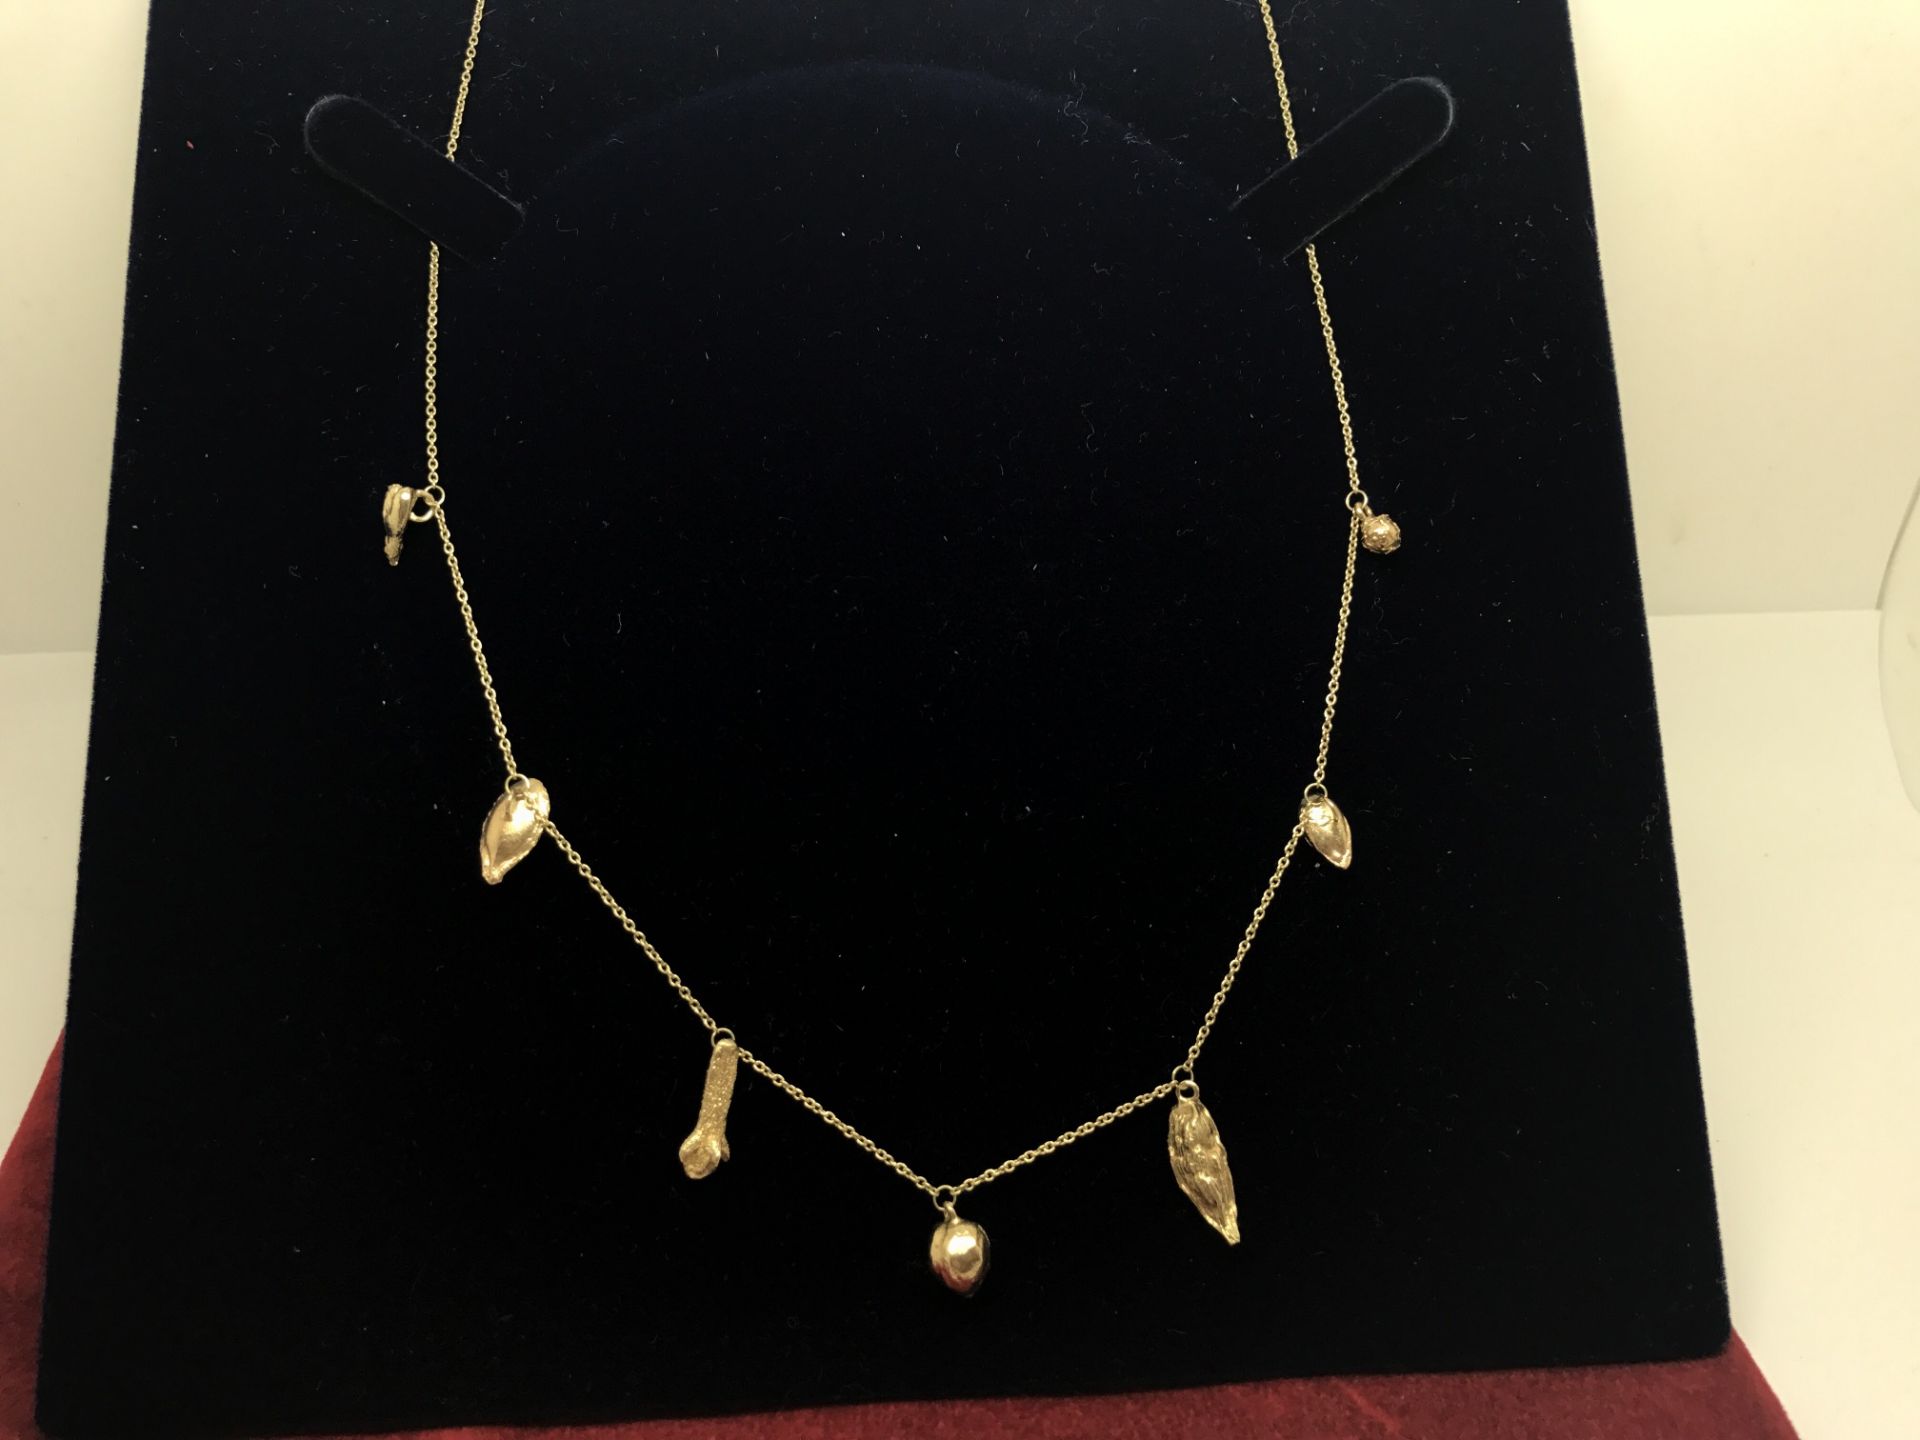 UNUSUAL 9CT GOLD CHARM STYLE NECKLACE - Image 2 of 2